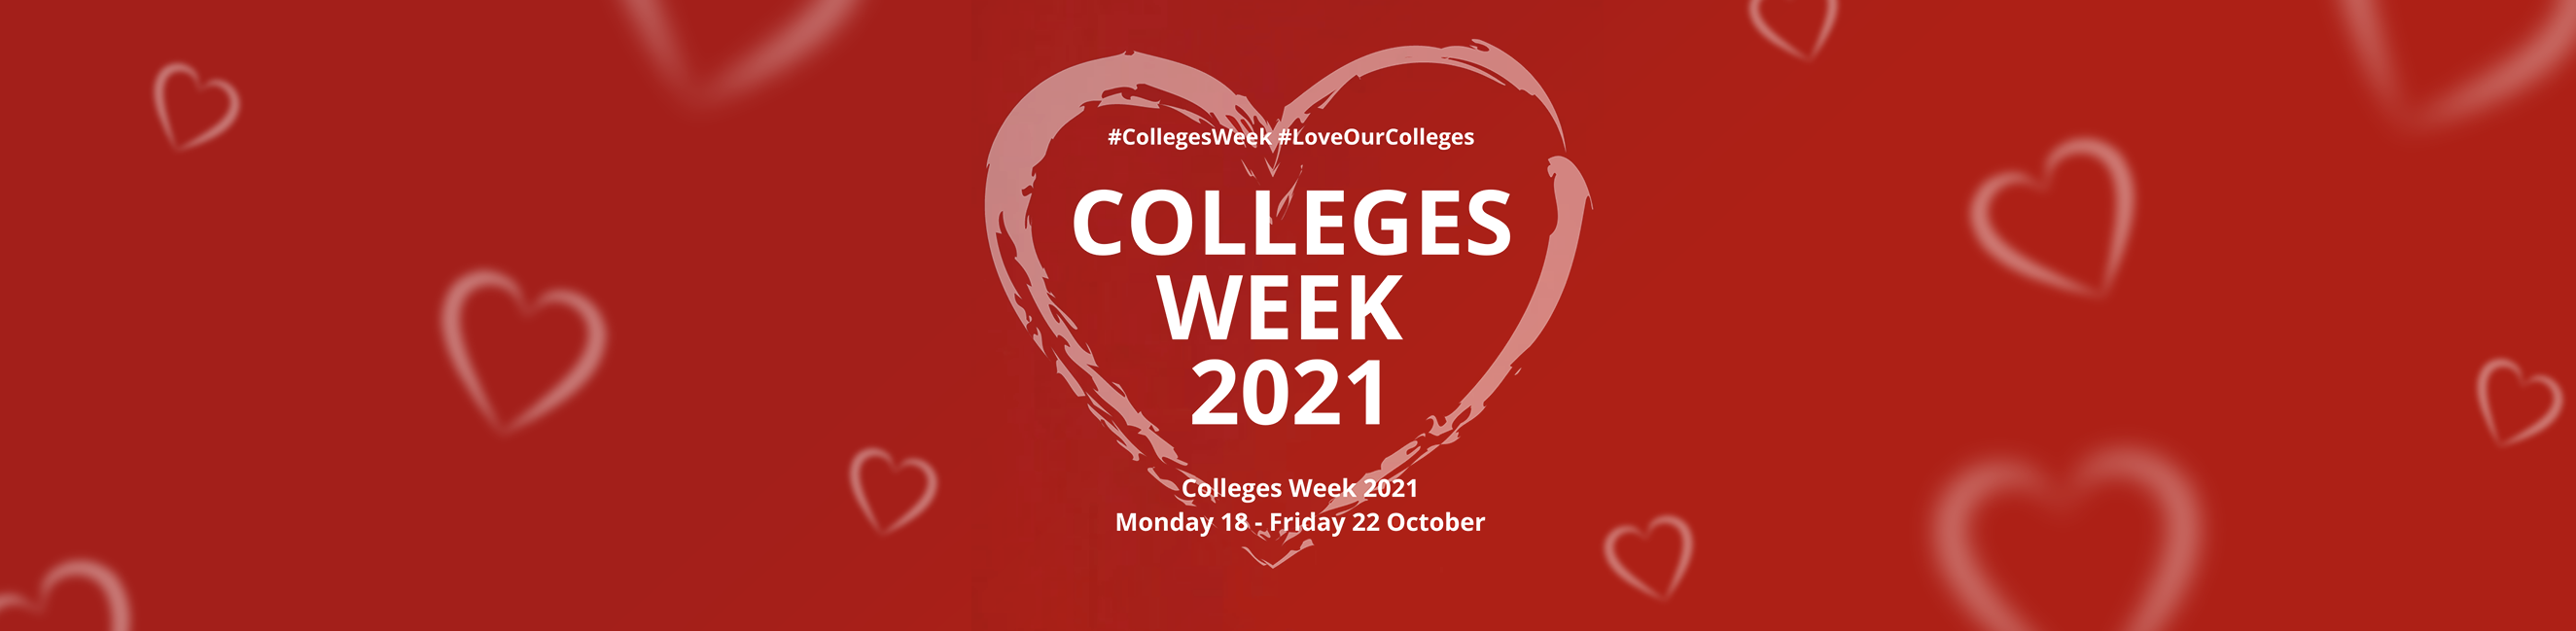 Love our colleges colleges week 2021 at weston college the best sixth form courses in weston-super-mare